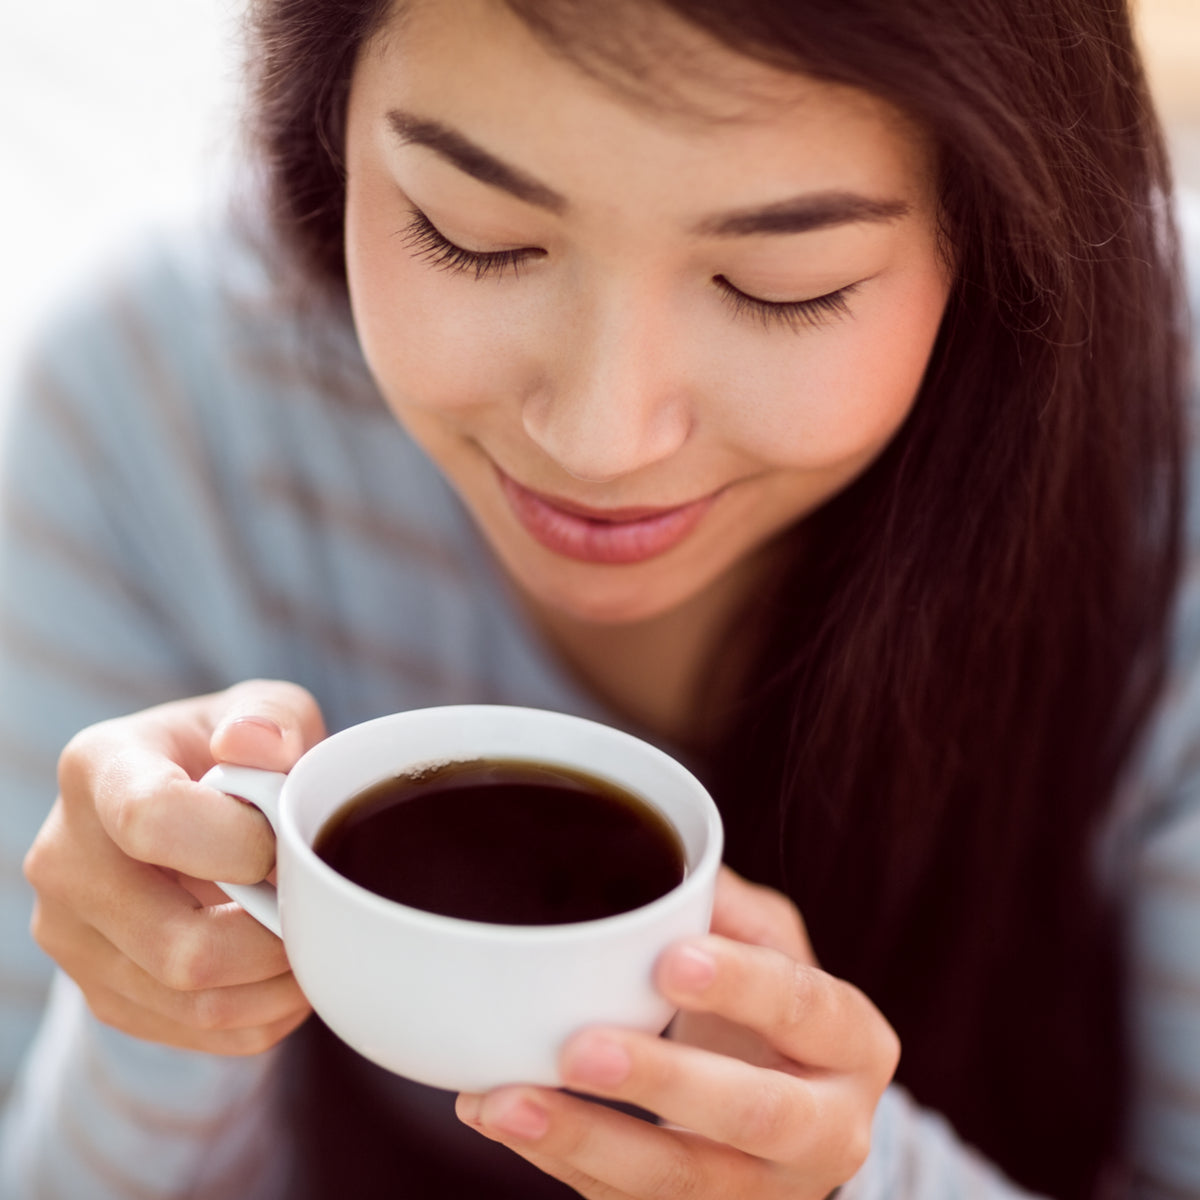 Benefits of Consuming Coffee